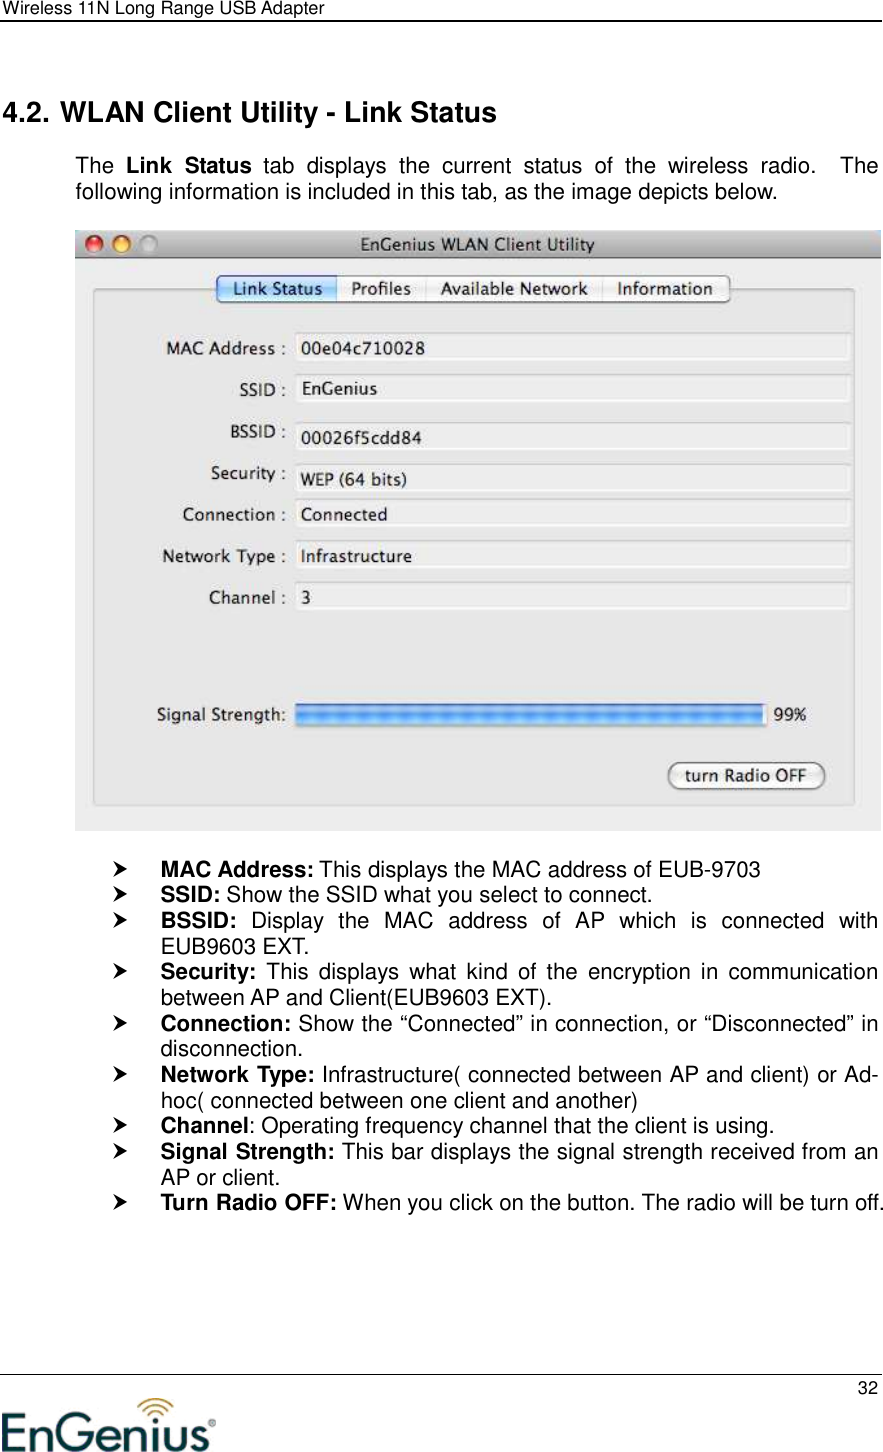 Wireless 11N Long Range USB Adapter  32   4.2. WLAN Client Utility - Link Status The  Link  Status  tab  displays  the  current  status  of  the  wireless  radio.    The following information is included in this tab, as the image depicts below.     MAC Address: This displays the MAC address of EUB-9703  SSID: Show the SSID what you select to connect.  BSSID:  Display  the  MAC  address  of  AP  which  is  connected  with EUB9603 EXT.  Security:  This  displays  what  kind  of  the  encryption  in  communication between AP and Client(EUB9603 EXT).  Connection: Show the “Connected” in connection, or “Disconnected” in disconnection.  Network Type: Infrastructure( connected between AP and client) or Ad-hoc( connected between one client and another)  Channel: Operating frequency channel that the client is using.  Signal Strength: This bar displays the signal strength received from an AP or client.  Turn Radio OFF: When you click on the button. The radio will be turn off. 